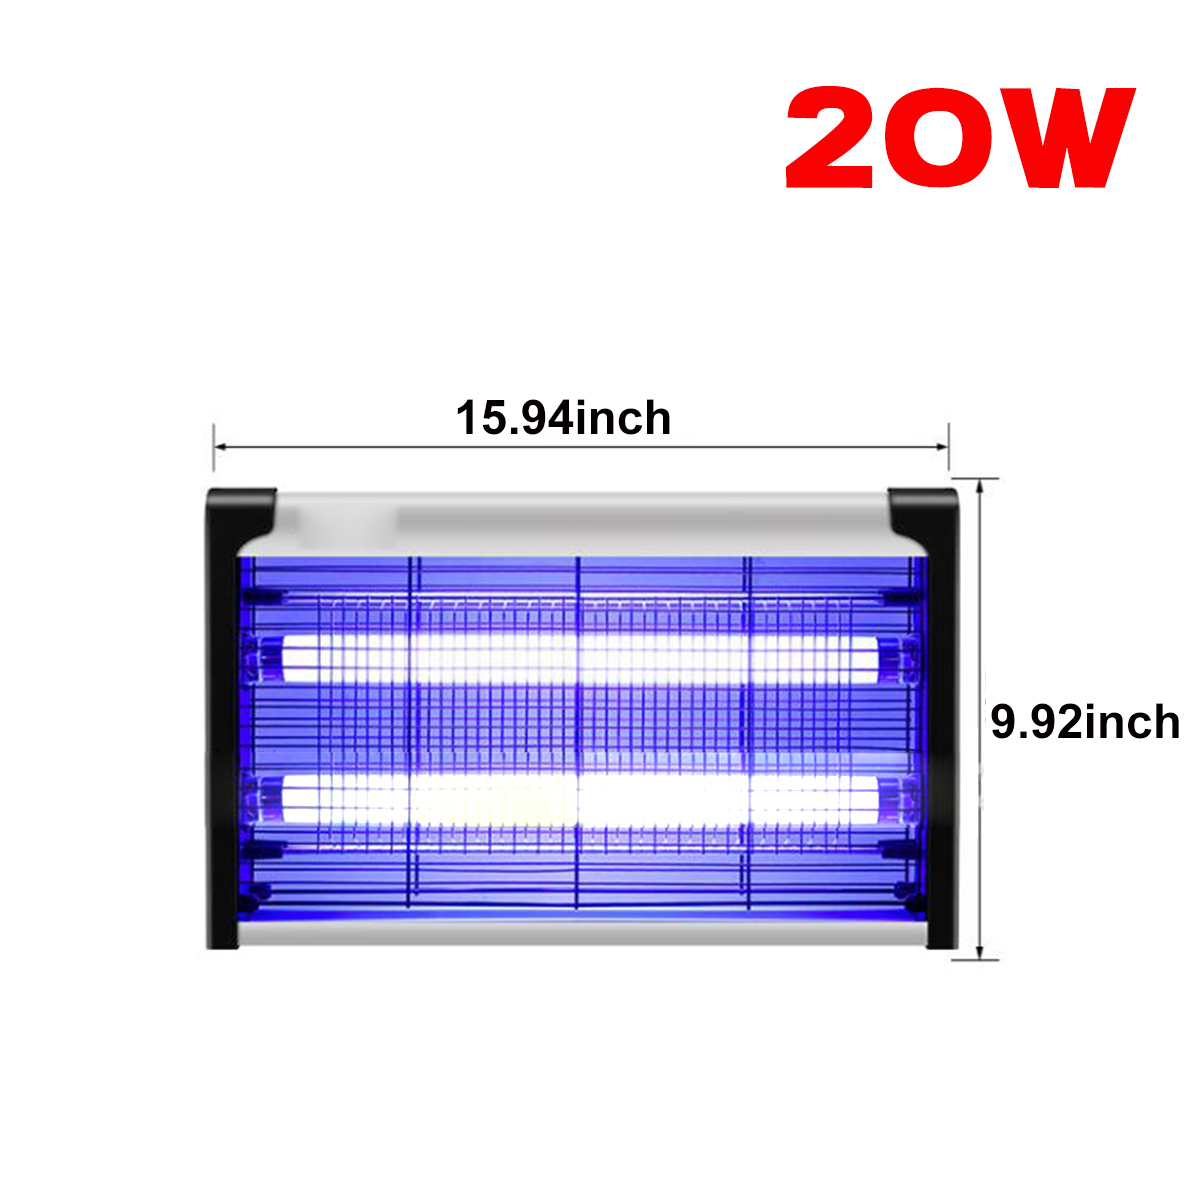 20W40W-Electric-Mosquito-Zapper-Bug-Killer-Light-Trap-Catcher-Low-Noise-Home-1791330-10